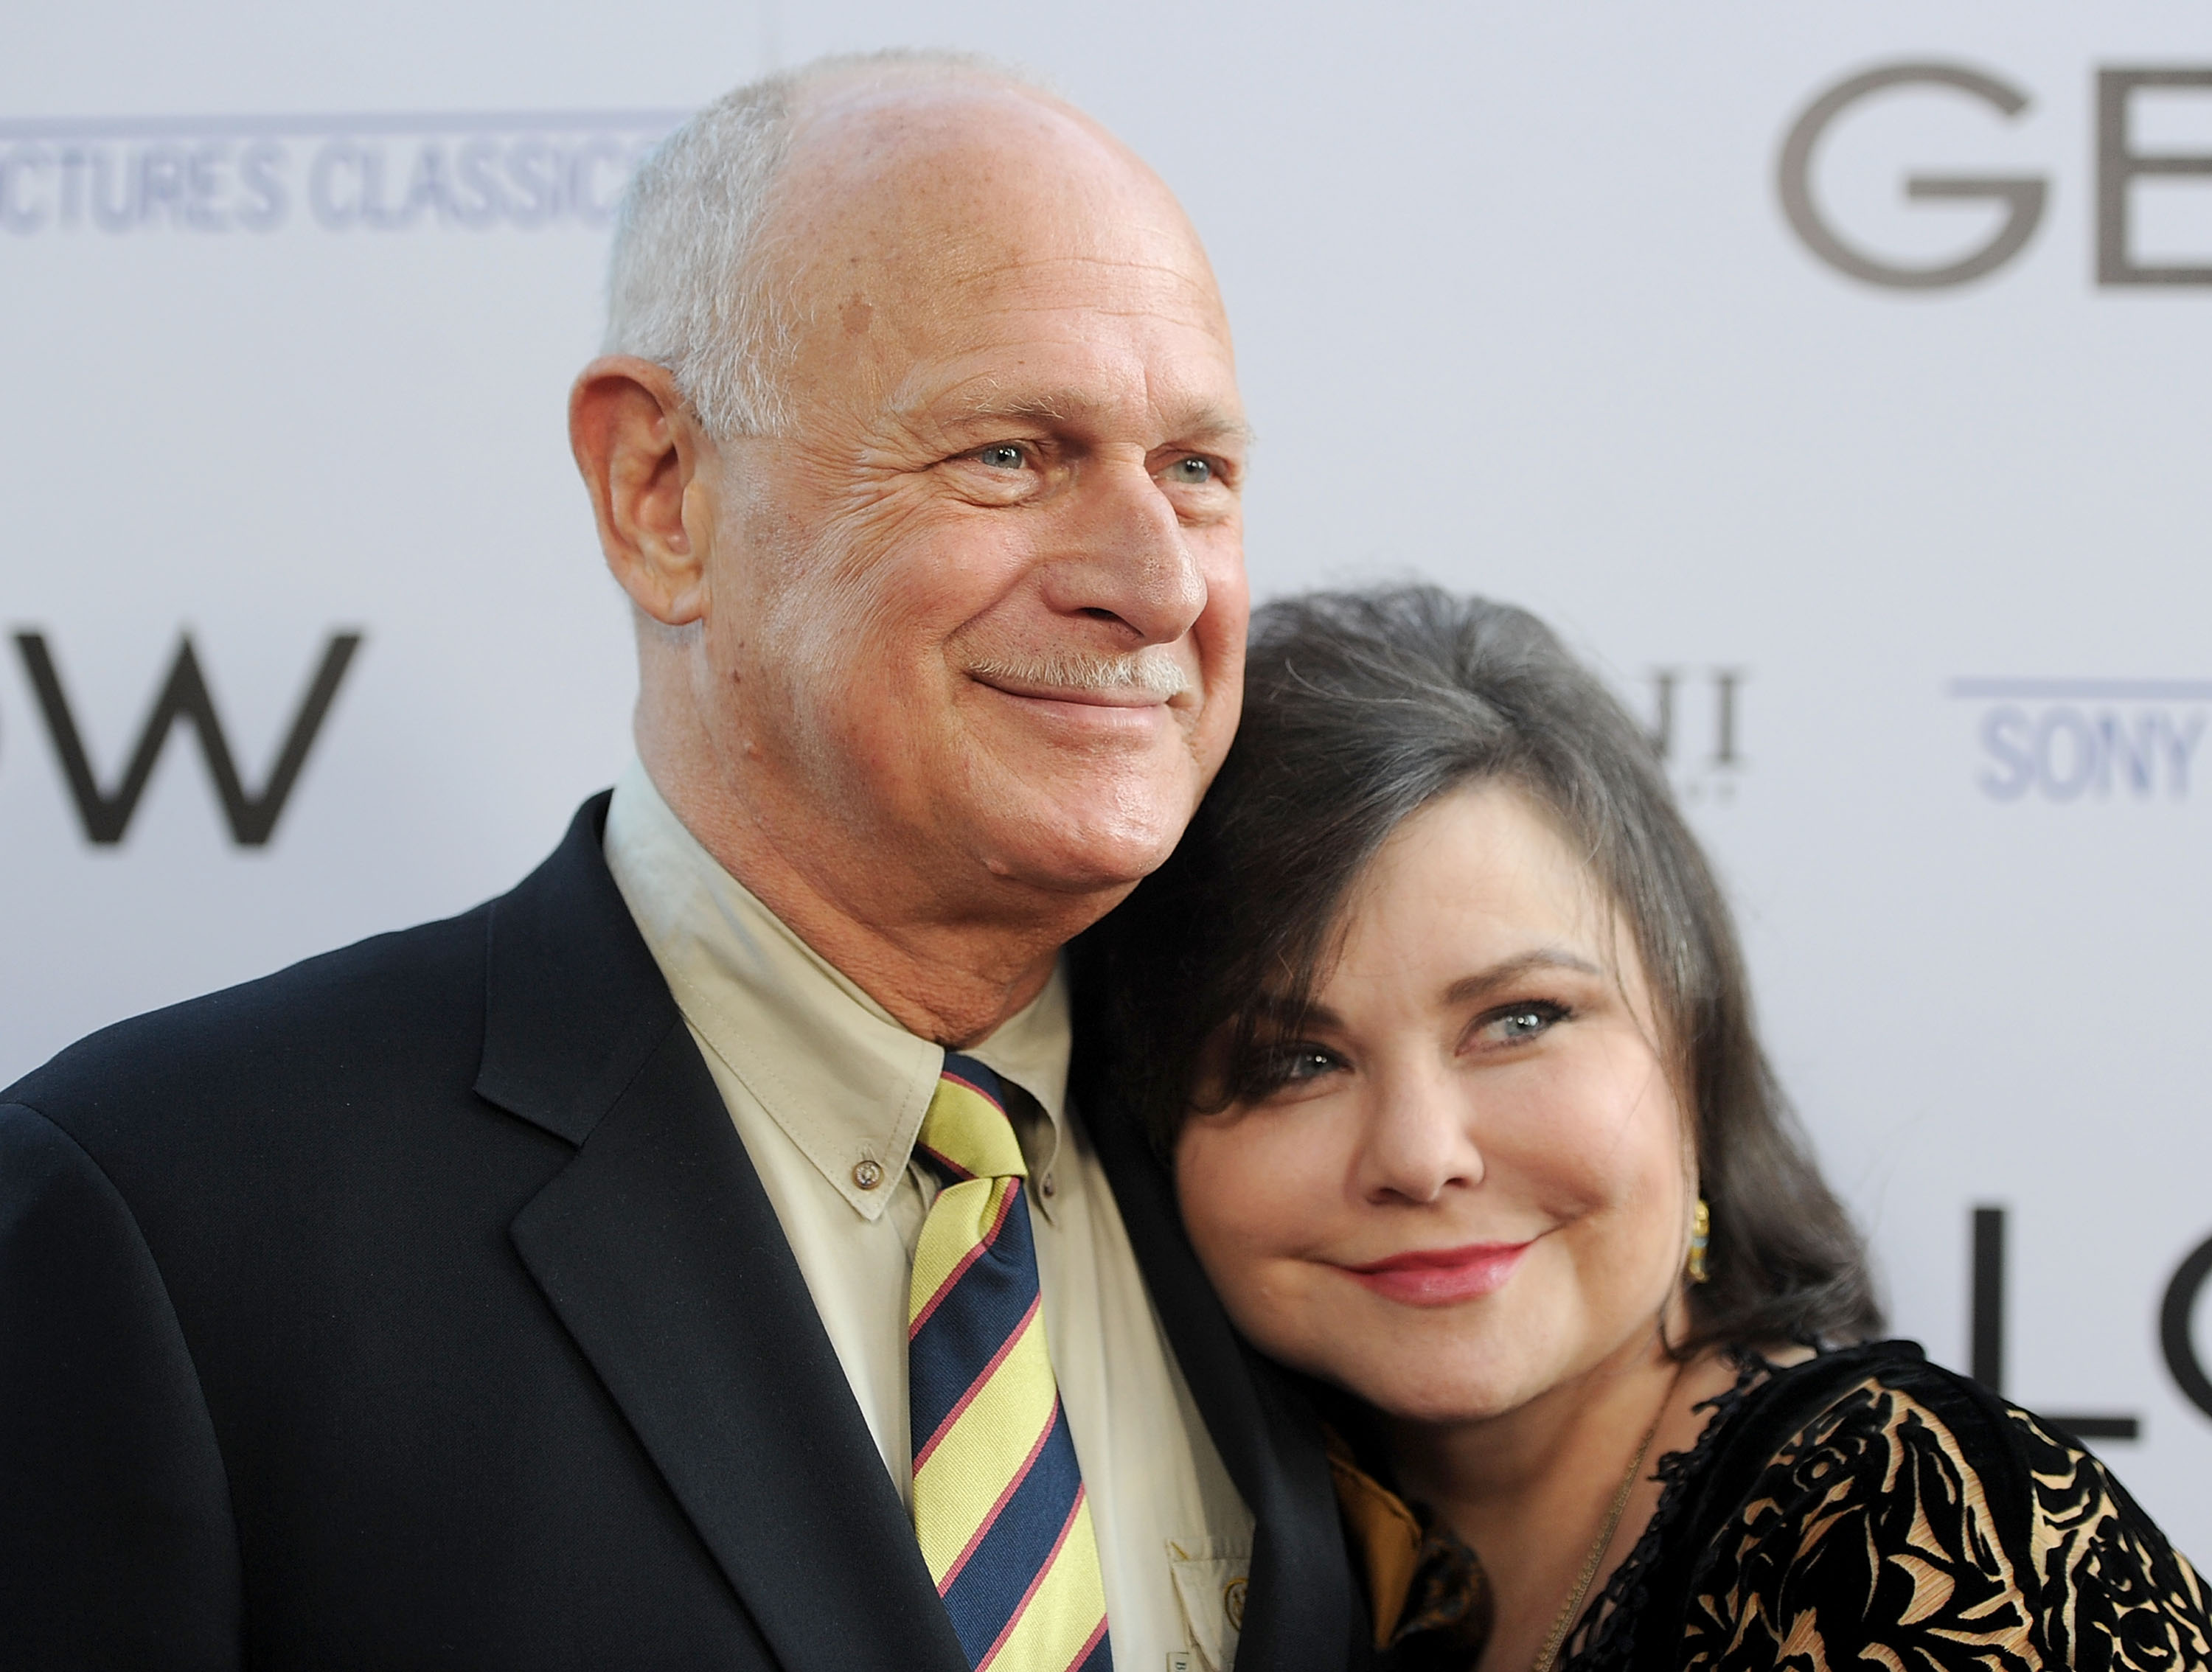 Gerald McRaney and Delta Burke at the premiere of "Get Low" on July 27, 2010 in Beverly Hills, California | Source: Getty Images